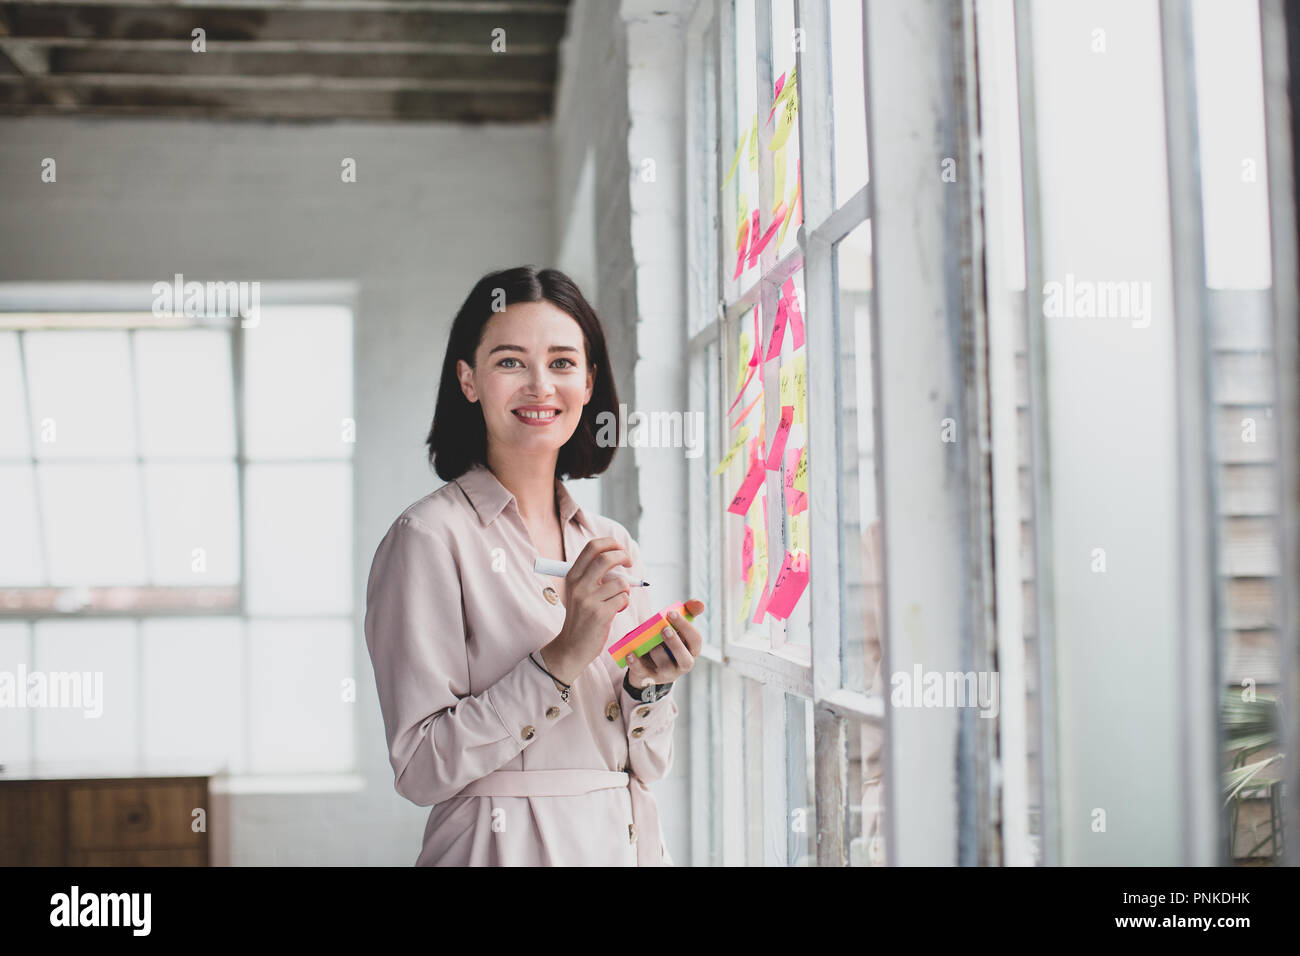 Portrait of young adult female brainstorming in a creative office with adhesive notes Stock Photo